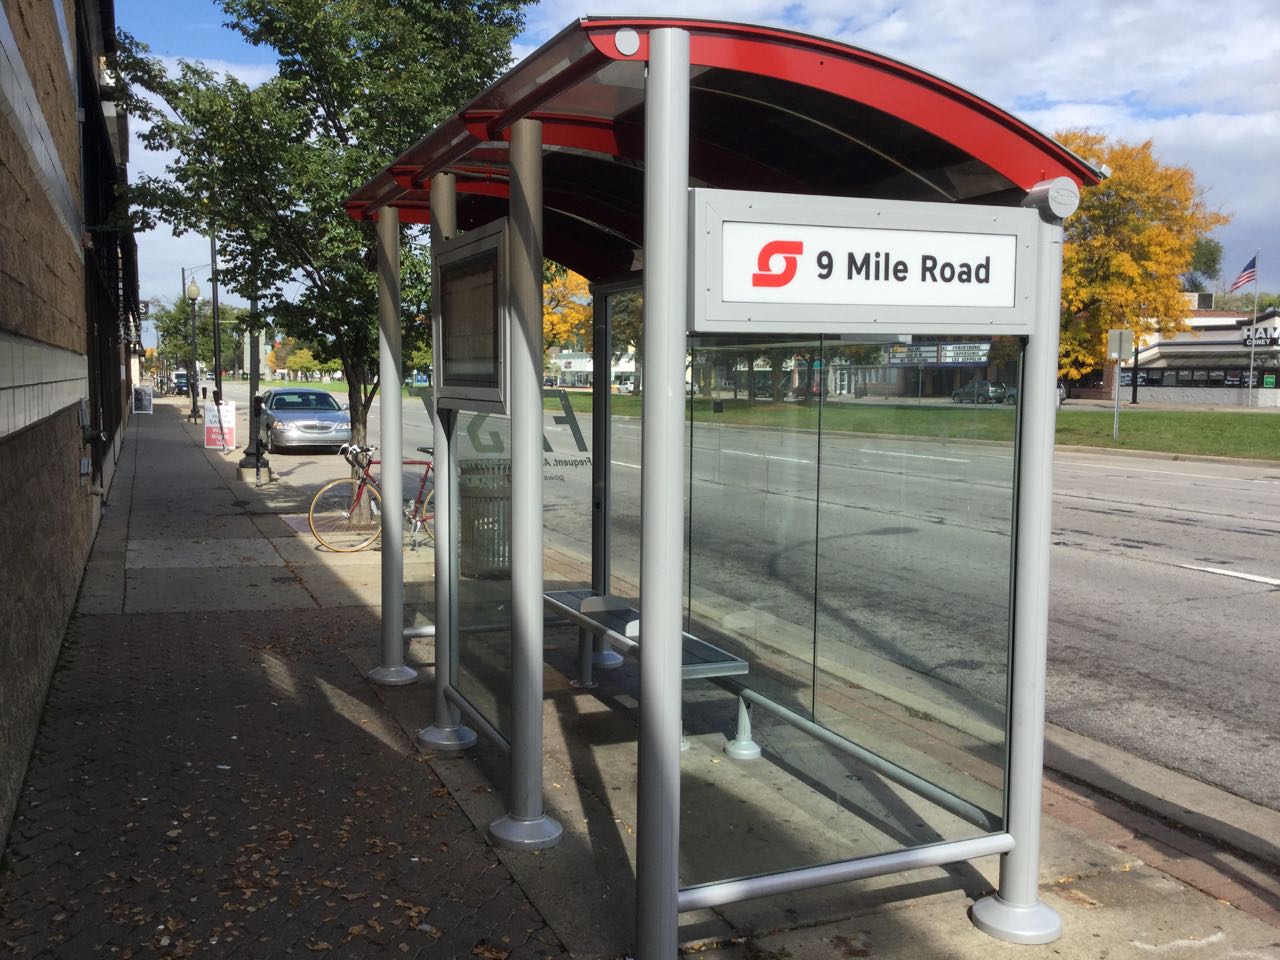 SMART Bus's Solar Powered Bus Stop Shelters with SmartLink Remote Device Management System by OutdoorLink